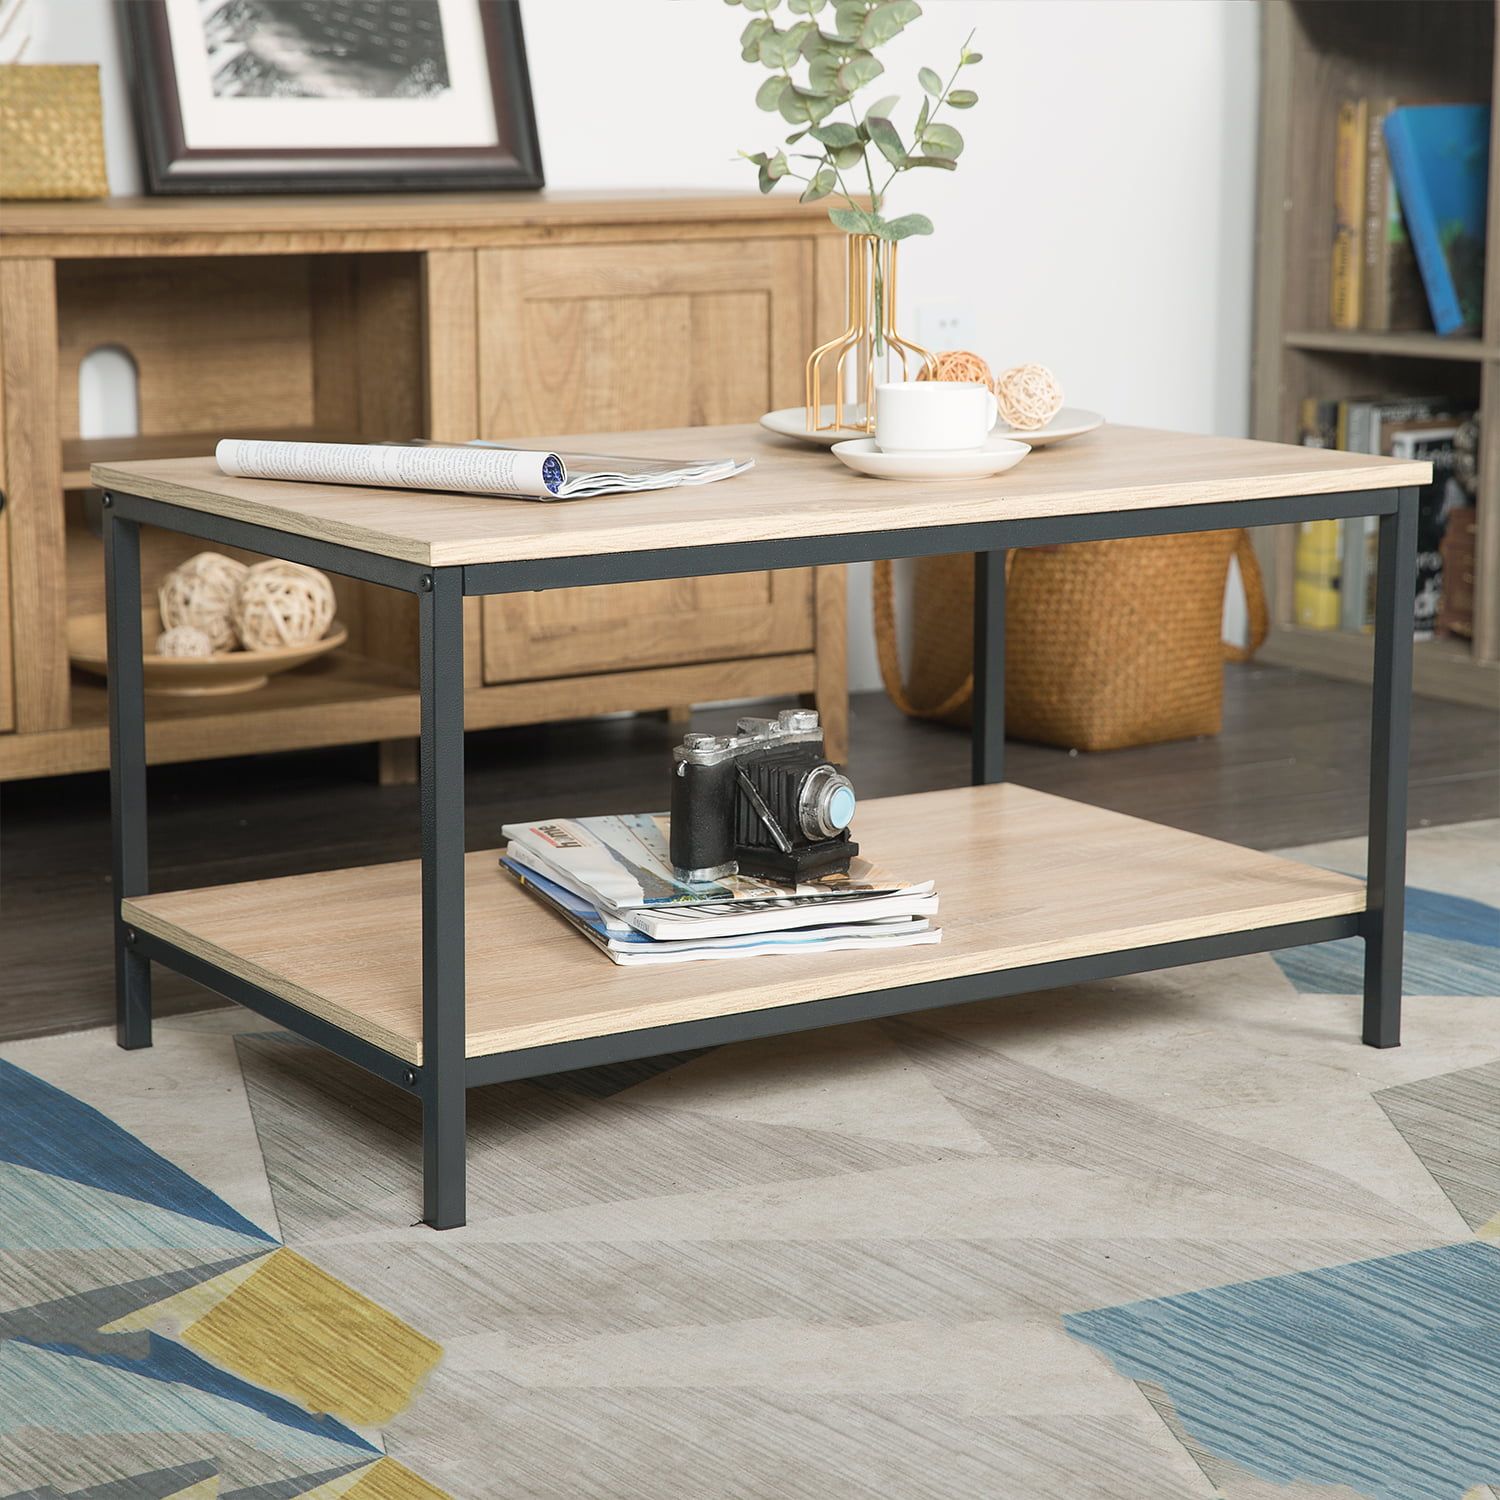 Finefind Modern Industrial Metal Rectangular Coffee Table With Storage Throughout Coffee Tables With Open Storage Shelves (Gallery 16 of 20)